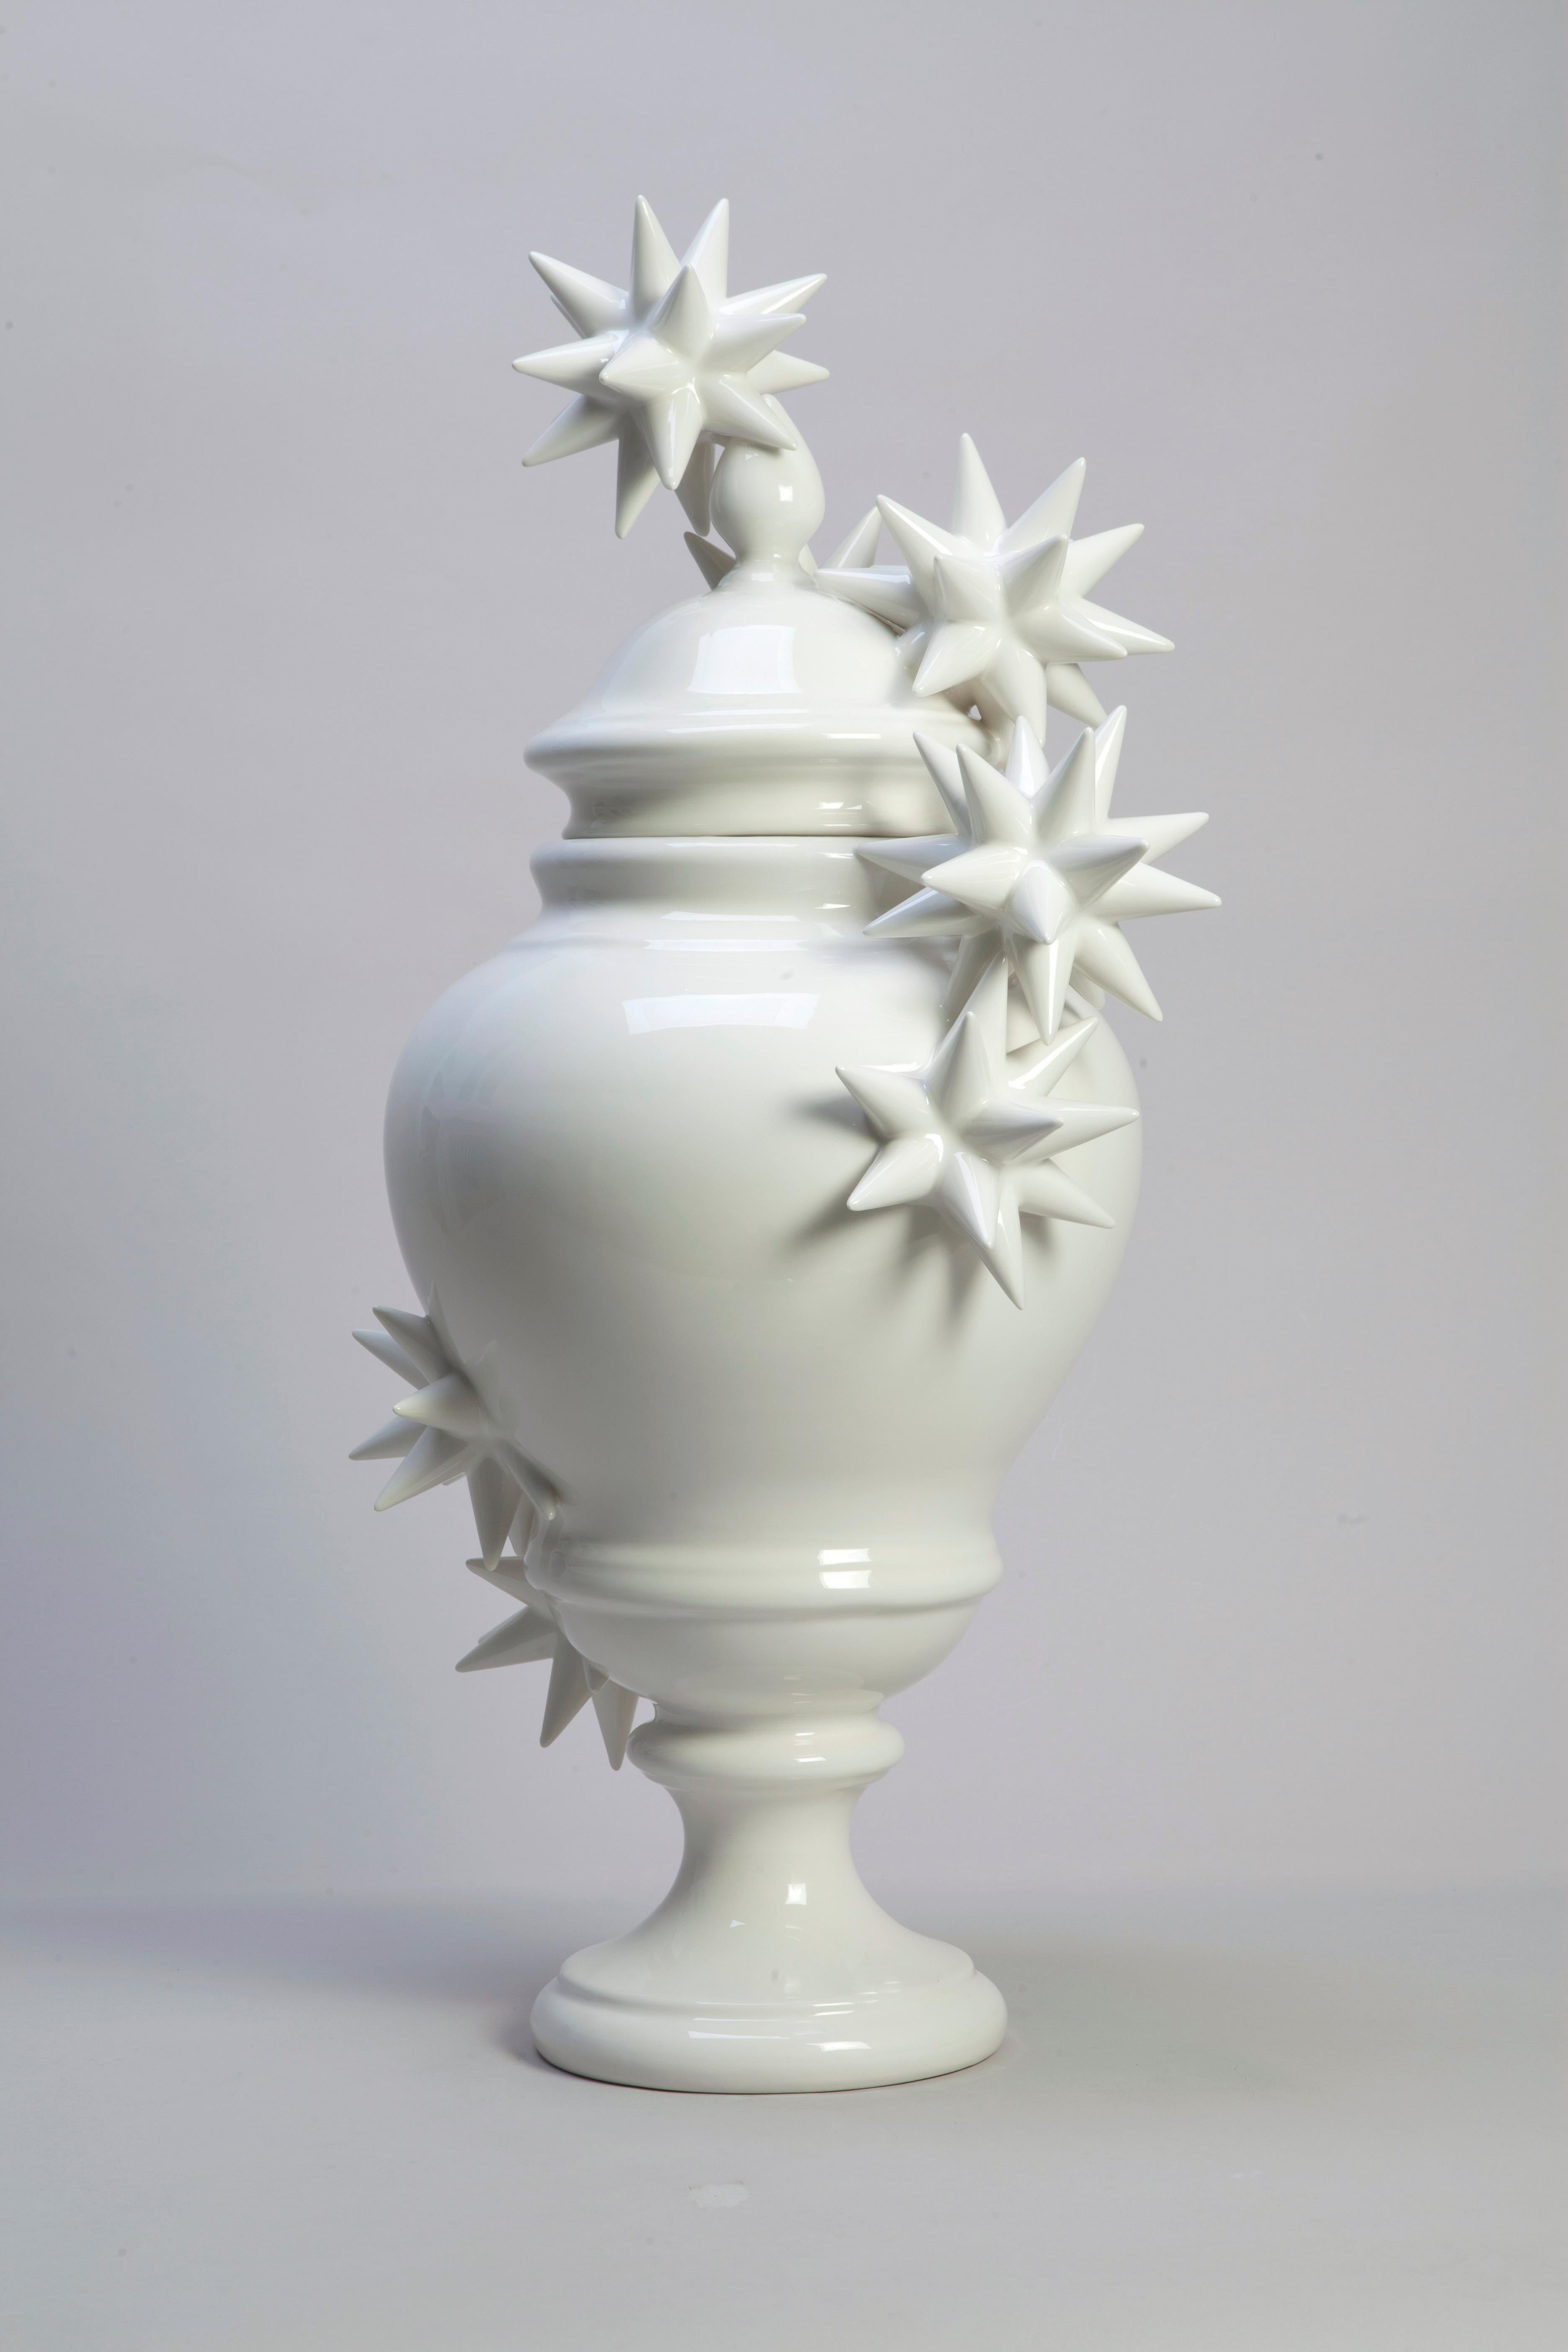 White vase with stars, unique piece, 2017, glazed earthenware, 36 x 76 cm height. Unique piece signed by the artist. 

Andrea Salvatori (Italy, 1975) is a visual artist working in ceramics to realize ironic and witty sculptures, sometimes involving